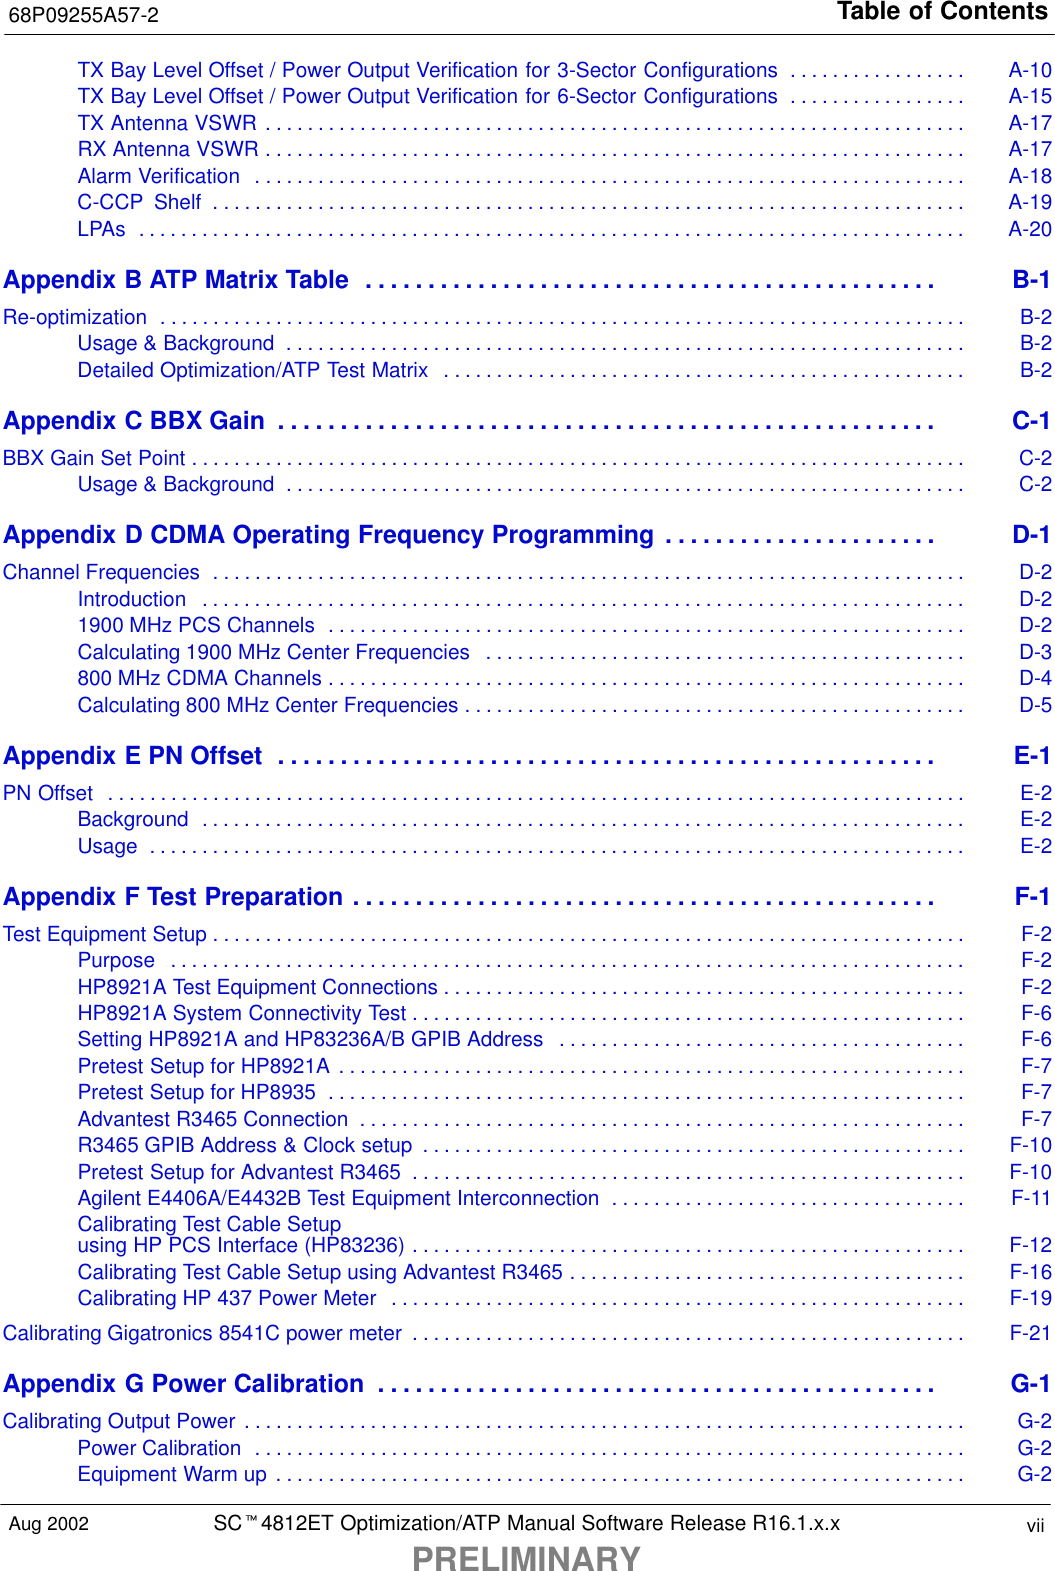 Table of Contents68P09255A57-2SCt4812ET Optimization/ATP Manual Software Release R16.1.x.xPRELIMINARYviiAug 2002TX Bay Level Offset / Power Output Verification for 3-Sector Configurations A-10. . . . . . . . . . . . . . . . . TX Bay Level Offset / Power Output Verification for 6-Sector Configurations A-15. . . . . . . . . . . . . . . . . TX Antenna VSWR A-17. . . . . . . . . . . . . . . . . . . . . . . . . . . . . . . . . . . . . . . . . . . . . . . . . . . . . . . . . . . . . . . . . . . RX Antenna VSWR A-17. . . . . . . . . . . . . . . . . . . . . . . . . . . . . . . . . . . . . . . . . . . . . . . . . . . . . . . . . . . . . . . . . . . Alarm Verification A-18. . . . . . . . . . . . . . . . . . . . . . . . . . . . . . . . . . . . . . . . . . . . . . . . . . . . . . . . . . . . . . . . . . . . C-CCP  Shelf A-19. . . . . . . . . . . . . . . . . . . . . . . . . . . . . . . . . . . . . . . . . . . . . . . . . . . . . . . . . . . . . . . . . . . . . . . . LPAs A-20. . . . . . . . . . . . . . . . . . . . . . . . . . . . . . . . . . . . . . . . . . . . . . . . . . . . . . . . . . . . . . . . . . . . . . . . . . . . . . . Appendix B ATP Matrix Table B-1. . . . . . . . . . . . . . . . . . . . . . . . . . . . . . . . . . . . . . . . . . . . . . Re-optimization B-2. . . . . . . . . . . . . . . . . . . . . . . . . . . . . . . . . . . . . . . . . . . . . . . . . . . . . . . . . . . . . . . . . . . . . . . . . . . . . Usage &amp; Background B-2. . . . . . . . . . . . . . . . . . . . . . . . . . . . . . . . . . . . . . . . . . . . . . . . . . . . . . . . . . . . . . . . . Detailed Optimization/ATP Test Matrix B-2. . . . . . . . . . . . . . . . . . . . . . . . . . . . . . . . . . . . . . . . . . . . . . . . . . Appendix C BBX Gain C-1. . . . . . . . . . . . . . . . . . . . . . . . . . . . . . . . . . . . . . . . . . . . . . . . . . . . . BBX Gain Set Point C-2. . . . . . . . . . . . . . . . . . . . . . . . . . . . . . . . . . . . . . . . . . . . . . . . . . . . . . . . . . . . . . . . . . . . . . . . . . Usage &amp; Background C-2. . . . . . . . . . . . . . . . . . . . . . . . . . . . . . . . . . . . . . . . . . . . . . . . . . . . . . . . . . . . . . . . . Appendix D CDMA Operating Frequency Programming D-1. . . . . . . . . . . . . . . . . . . . . . Channel Frequencies D-2. . . . . . . . . . . . . . . . . . . . . . . . . . . . . . . . . . . . . . . . . . . . . . . . . . . . . . . . . . . . . . . . . . . . . . . . Introduction D-2. . . . . . . . . . . . . . . . . . . . . . . . . . . . . . . . . . . . . . . . . . . . . . . . . . . . . . . . . . . . . . . . . . . . . . . . . 1900 MHz PCS Channels D-2. . . . . . . . . . . . . . . . . . . . . . . . . . . . . . . . . . . . . . . . . . . . . . . . . . . . . . . . . . . . . Calculating 1900 MHz Center Frequencies D-3. . . . . . . . . . . . . . . . . . . . . . . . . . . . . . . . . . . . . . . . . . . . . . 800 MHz CDMA Channels D-4. . . . . . . . . . . . . . . . . . . . . . . . . . . . . . . . . . . . . . . . . . . . . . . . . . . . . . . . . . . . . Calculating 800 MHz Center Frequencies D-5. . . . . . . . . . . . . . . . . . . . . . . . . . . . . . . . . . . . . . . . . . . . . . . . Appendix E PN Offset E-1. . . . . . . . . . . . . . . . . . . . . . . . . . . . . . . . . . . . . . . . . . . . . . . . . . . . . PN Offset E-2. . . . . . . . . . . . . . . . . . . . . . . . . . . . . . . . . . . . . . . . . . . . . . . . . . . . . . . . . . . . . . . . . . . . . . . . . . . . . . . . . . Background E-2. . . . . . . . . . . . . . . . . . . . . . . . . . . . . . . . . . . . . . . . . . . . . . . . . . . . . . . . . . . . . . . . . . . . . . . . . Usage E-2. . . . . . . . . . . . . . . . . . . . . . . . . . . . . . . . . . . . . . . . . . . . . . . . . . . . . . . . . . . . . . . . . . . . . . . . . . . . . . Appendix F Test Preparation F-1. . . . . . . . . . . . . . . . . . . . . . . . . . . . . . . . . . . . . . . . . . . . . . . Test Equipment Setup F-2. . . . . . . . . . . . . . . . . . . . . . . . . . . . . . . . . . . . . . . . . . . . . . . . . . . . . . . . . . . . . . . . . . . . . . . . Purpose F-2. . . . . . . . . . . . . . . . . . . . . . . . . . . . . . . . . . . . . . . . . . . . . . . . . . . . . . . . . . . . . . . . . . . . . . . . . . . . HP8921A Test Equipment Connections F-2. . . . . . . . . . . . . . . . . . . . . . . . . . . . . . . . . . . . . . . . . . . . . . . . . . HP8921A System Connectivity Test F-6. . . . . . . . . . . . . . . . . . . . . . . . . . . . . . . . . . . . . . . . . . . . . . . . . . . . . Setting HP8921A and HP83236A/B GPIB Address F-6. . . . . . . . . . . . . . . . . . . . . . . . . . . . . . . . . . . . . . . Pretest Setup for HP8921A F-7. . . . . . . . . . . . . . . . . . . . . . . . . . . . . . . . . . . . . . . . . . . . . . . . . . . . . . . . . . . . Pretest Setup for HP8935 F-7. . . . . . . . . . . . . . . . . . . . . . . . . . . . . . . . . . . . . . . . . . . . . . . . . . . . . . . . . . . . . Advantest R3465 Connection F-7. . . . . . . . . . . . . . . . . . . . . . . . . . . . . . . . . . . . . . . . . . . . . . . . . . . . . . . . . . R3465 GPIB Address &amp; Clock setup F-10. . . . . . . . . . . . . . . . . . . . . . . . . . . . . . . . . . . . . . . . . . . . . . . . . . . . Pretest Setup for Advantest R3465 F-10. . . . . . . . . . . . . . . . . . . . . . . . . . . . . . . . . . . . . . . . . . . . . . . . . . . . . Agilent E4406A/E4432B Test Equipment Interconnection F-11. . . . . . . . . . . . . . . . . . . . . . . . . . . . . . . . . . Calibrating Test Cable Setupusing HP PCS Interface (HP83236) F-12. . . . . . . . . . . . . . . . . . . . . . . . . . . . . . . . . . . . . . . . . . . . . . . . . . . . . Calibrating Test Cable Setup using Advantest R3465 F-16. . . . . . . . . . . . . . . . . . . . . . . . . . . . . . . . . . . . . . Calibrating HP 437 Power Meter F-19. . . . . . . . . . . . . . . . . . . . . . . . . . . . . . . . . . . . . . . . . . . . . . . . . . . . . . . Calibrating Gigatronics 8541C power meter F-21. . . . . . . . . . . . . . . . . . . . . . . . . . . . . . . . . . . . . . . . . . . . . . . . . . . . . Appendix G Power Calibration G-1. . . . . . . . . . . . . . . . . . . . . . . . . . . . . . . . . . . . . . . . . . . . . Calibrating Output Power G-2. . . . . . . . . . . . . . . . . . . . . . . . . . . . . . . . . . . . . . . . . . . . . . . . . . . . . . . . . . . . . . . . . . . . . Power Calibration G-2. . . . . . . . . . . . . . . . . . . . . . . . . . . . . . . . . . . . . . . . . . . . . . . . . . . . . . . . . . . . . . . . . . . . Equipment Warm up G-2. . . . . . . . . . . . . . . . . . . . . . . . . . . . . . . . . . . . . . . . . . . . . . . . . . . . . . . . . . . . . . . . . . 